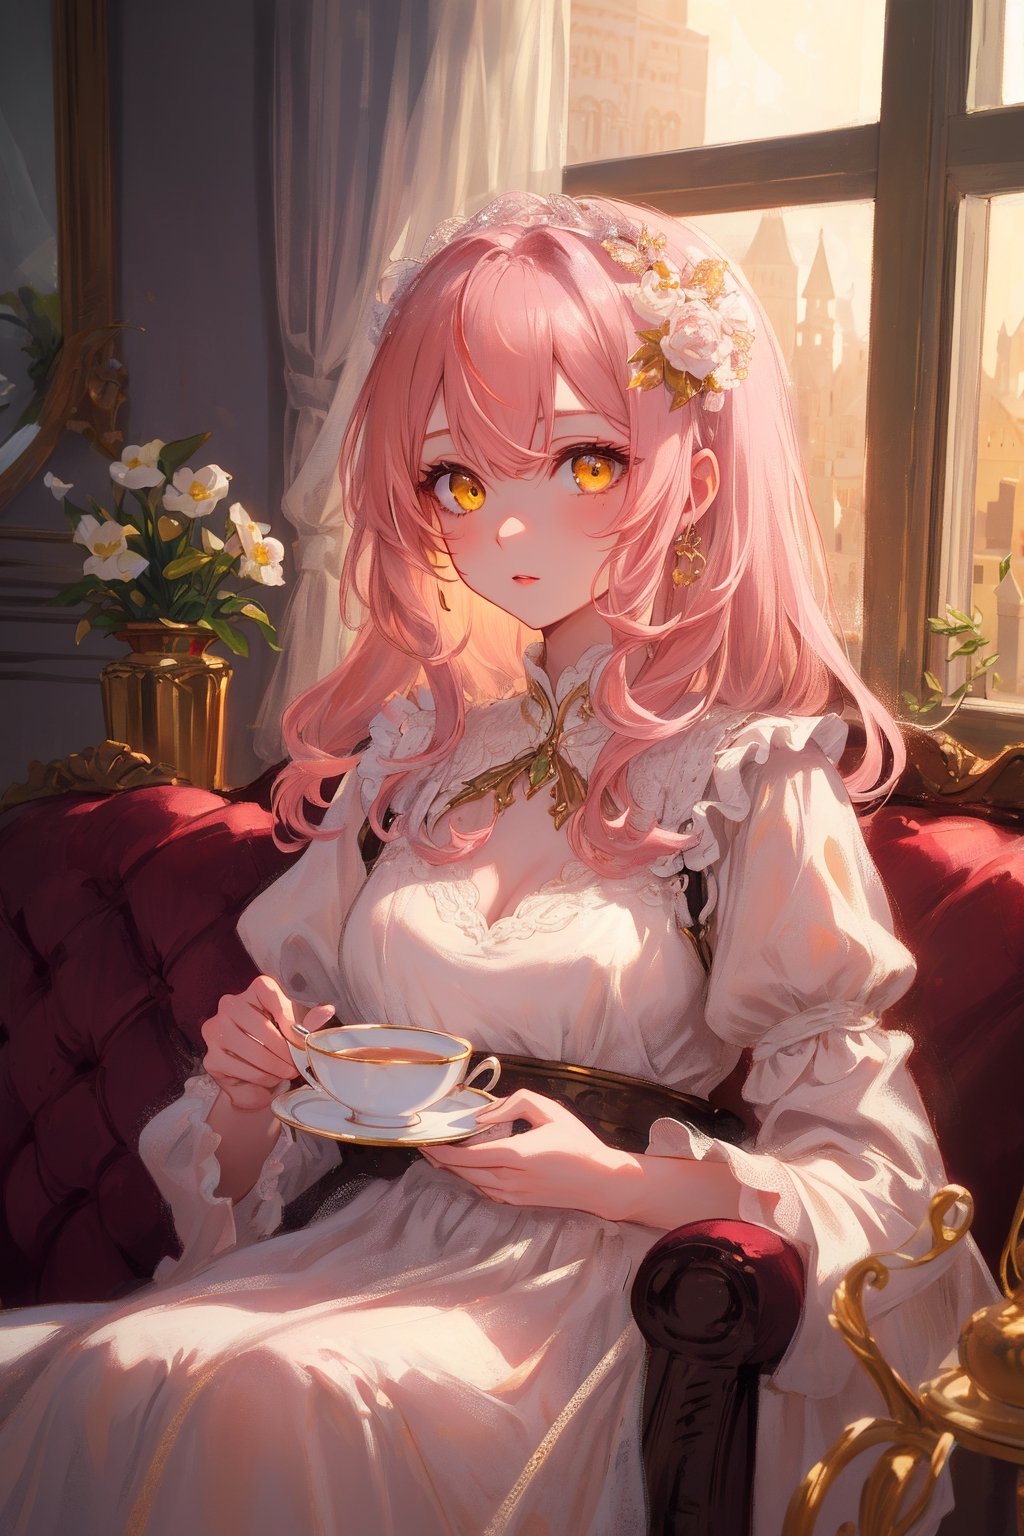 golden eyes ,pink hair,
delicate face,High detailed,Beautiful artistic conception,sweet atmosphere,Long hair,Details face, details hands, details eyes ,white dress,perfect,Princess,classic beauty,sit by the window,Holding a fancy tea cup,light, yellow_eyes